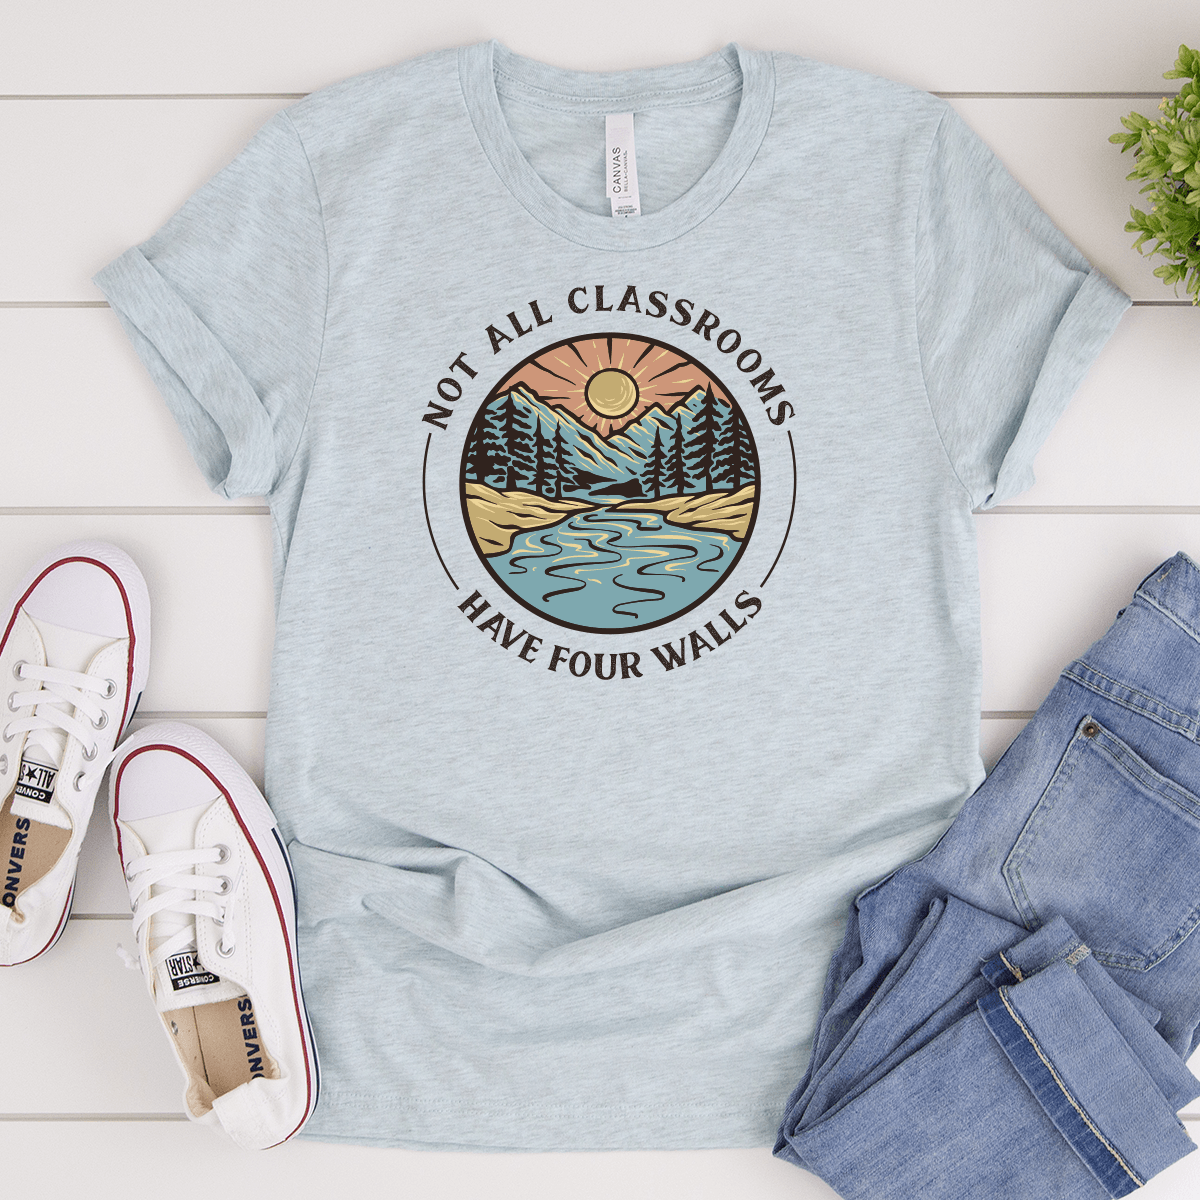 Not All Classrooms Have Four Walls - Bella+Canvas Tee